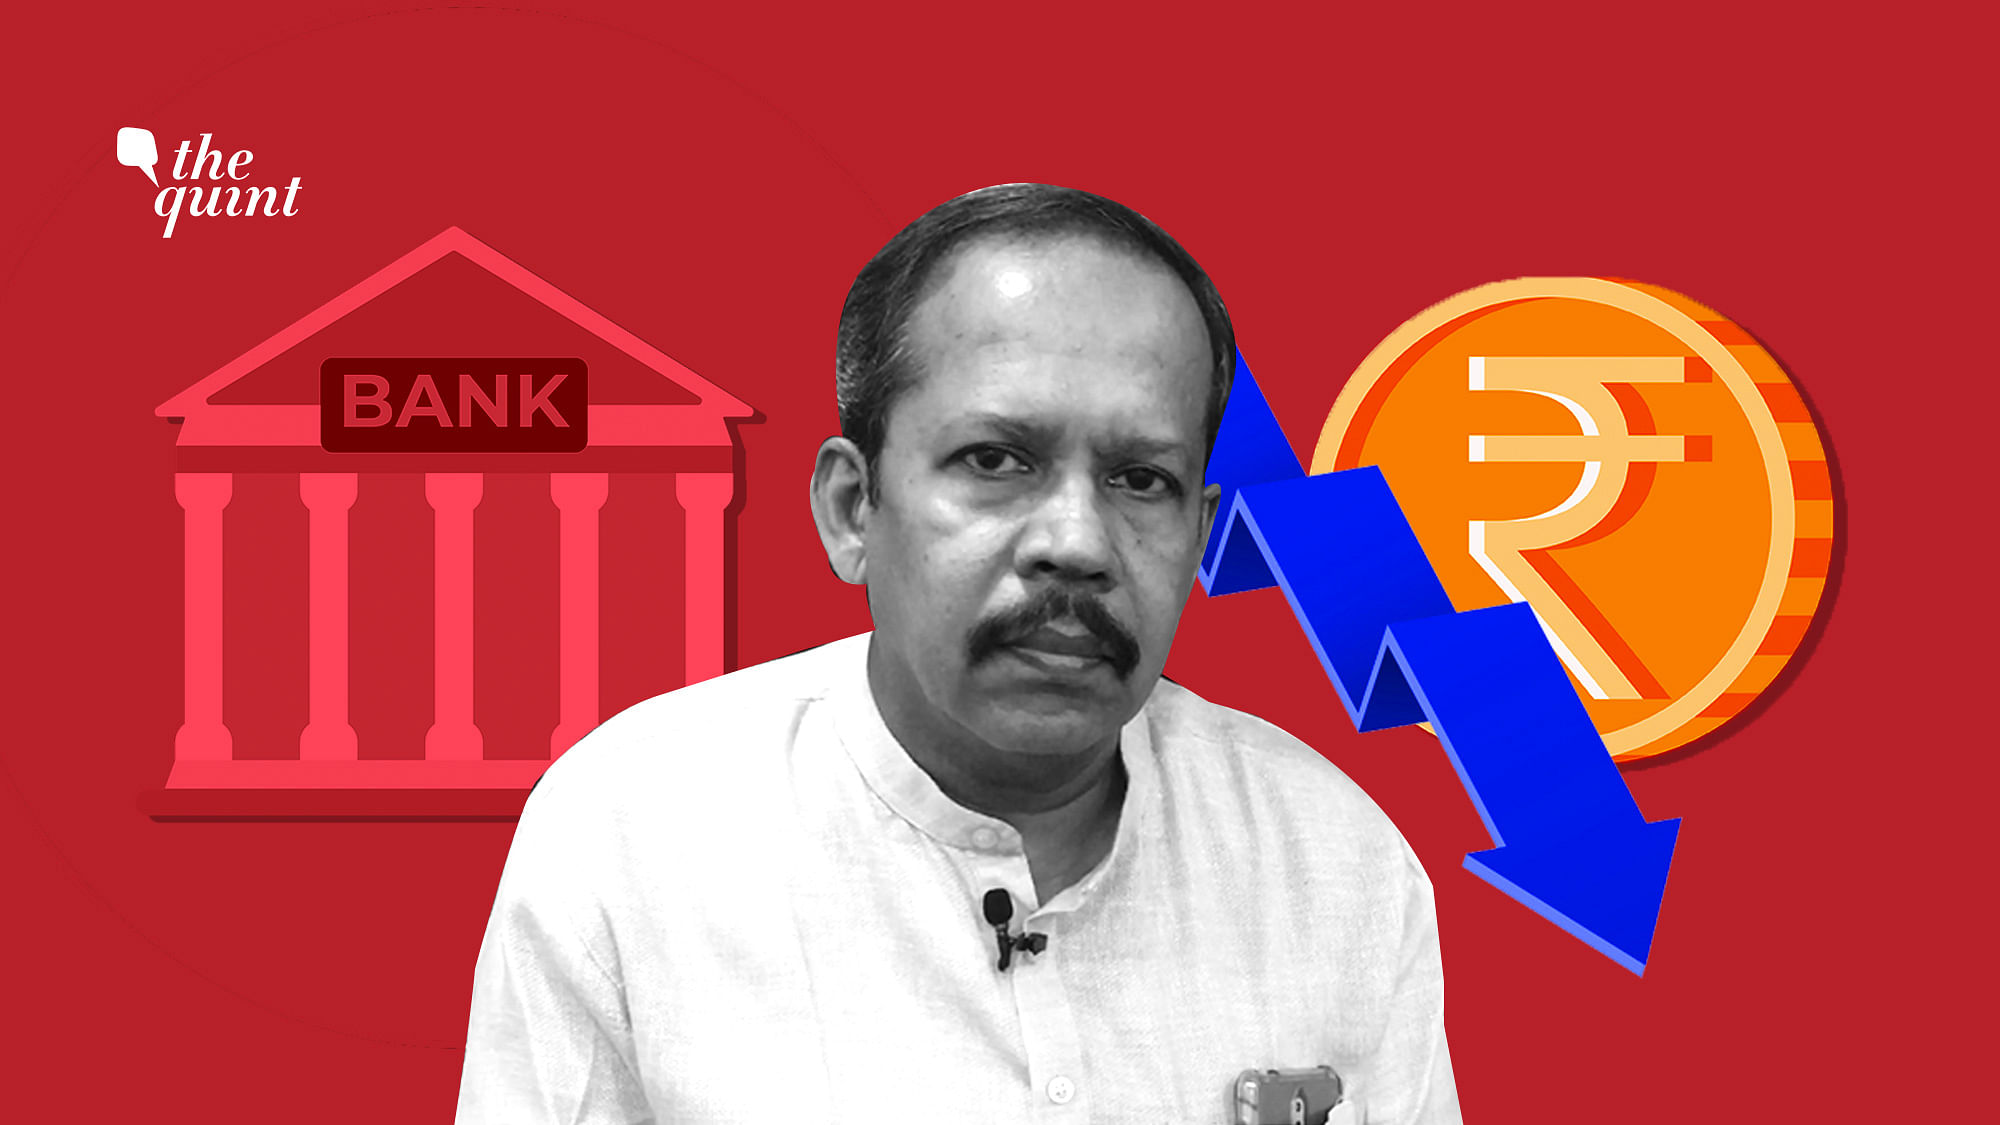 Saji Narayanan, President of Bharatiya Mazdoor Sangh, explains why he is opposed to merger of public sector banks.